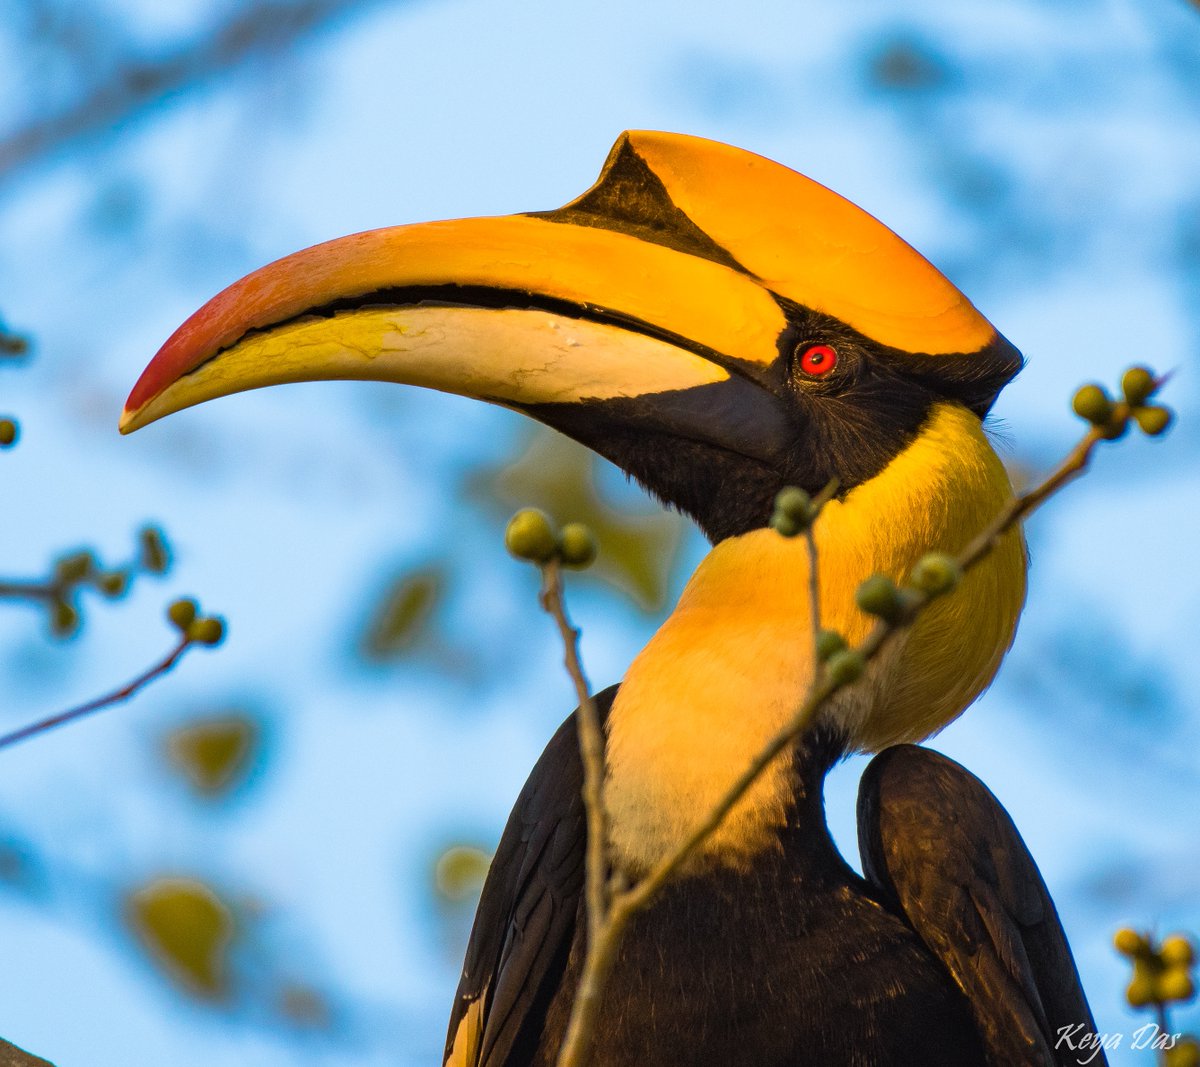  #WildAboutFactsSeveral  #hornbill species have a distinct  #casque on their upper mandible.  #GreatHornbills have a prominent  #yellow and  #black casque. Keya Das